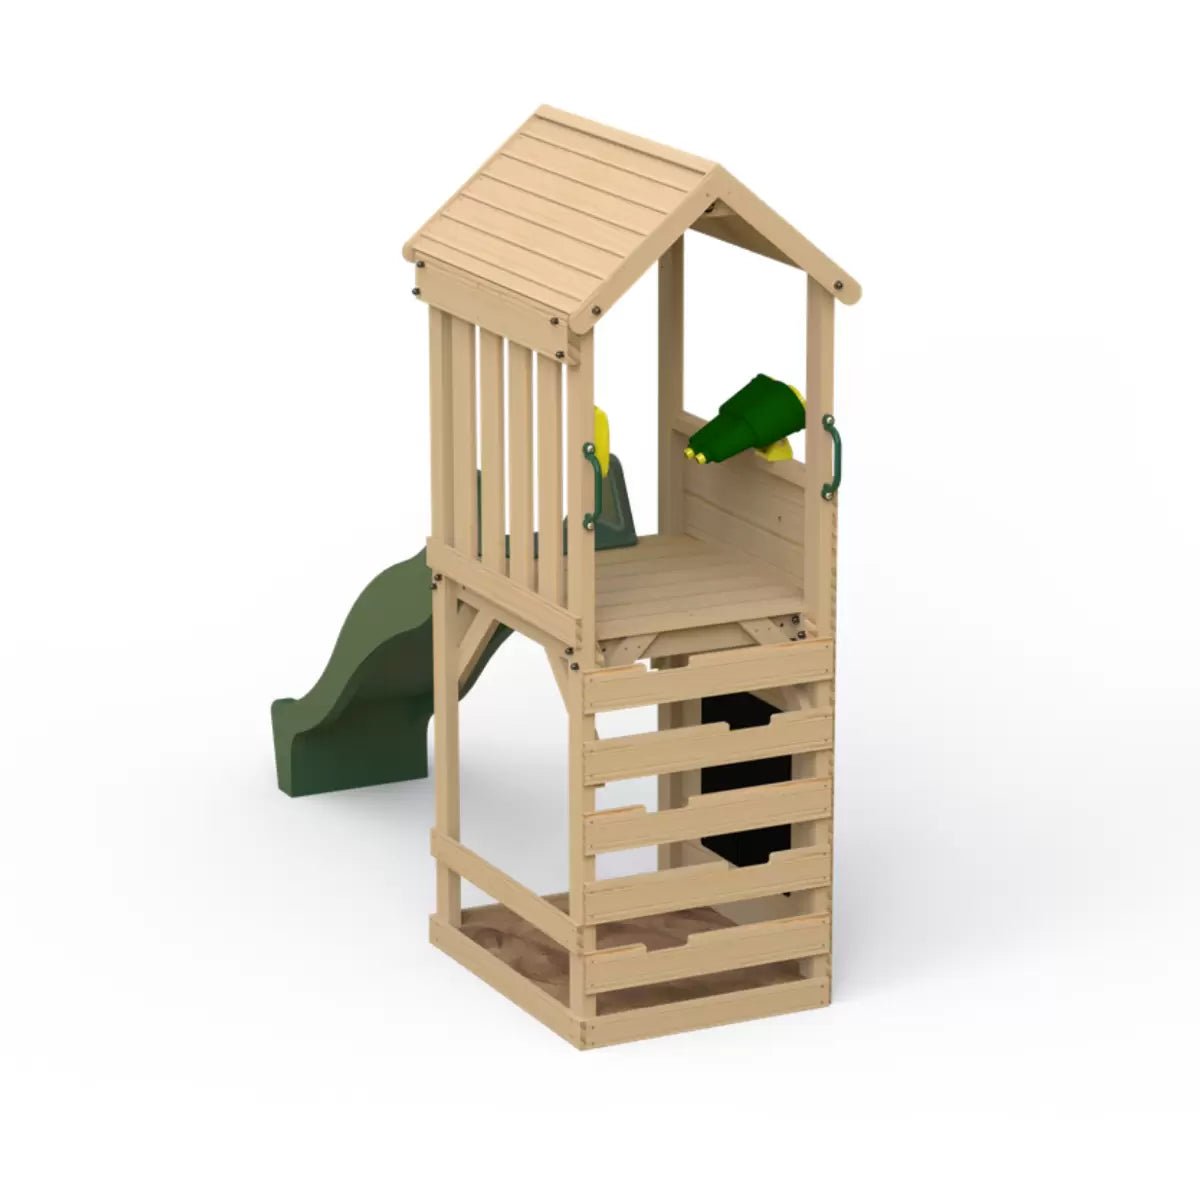 Shop Now - Plum Lookout Tower Play Centre